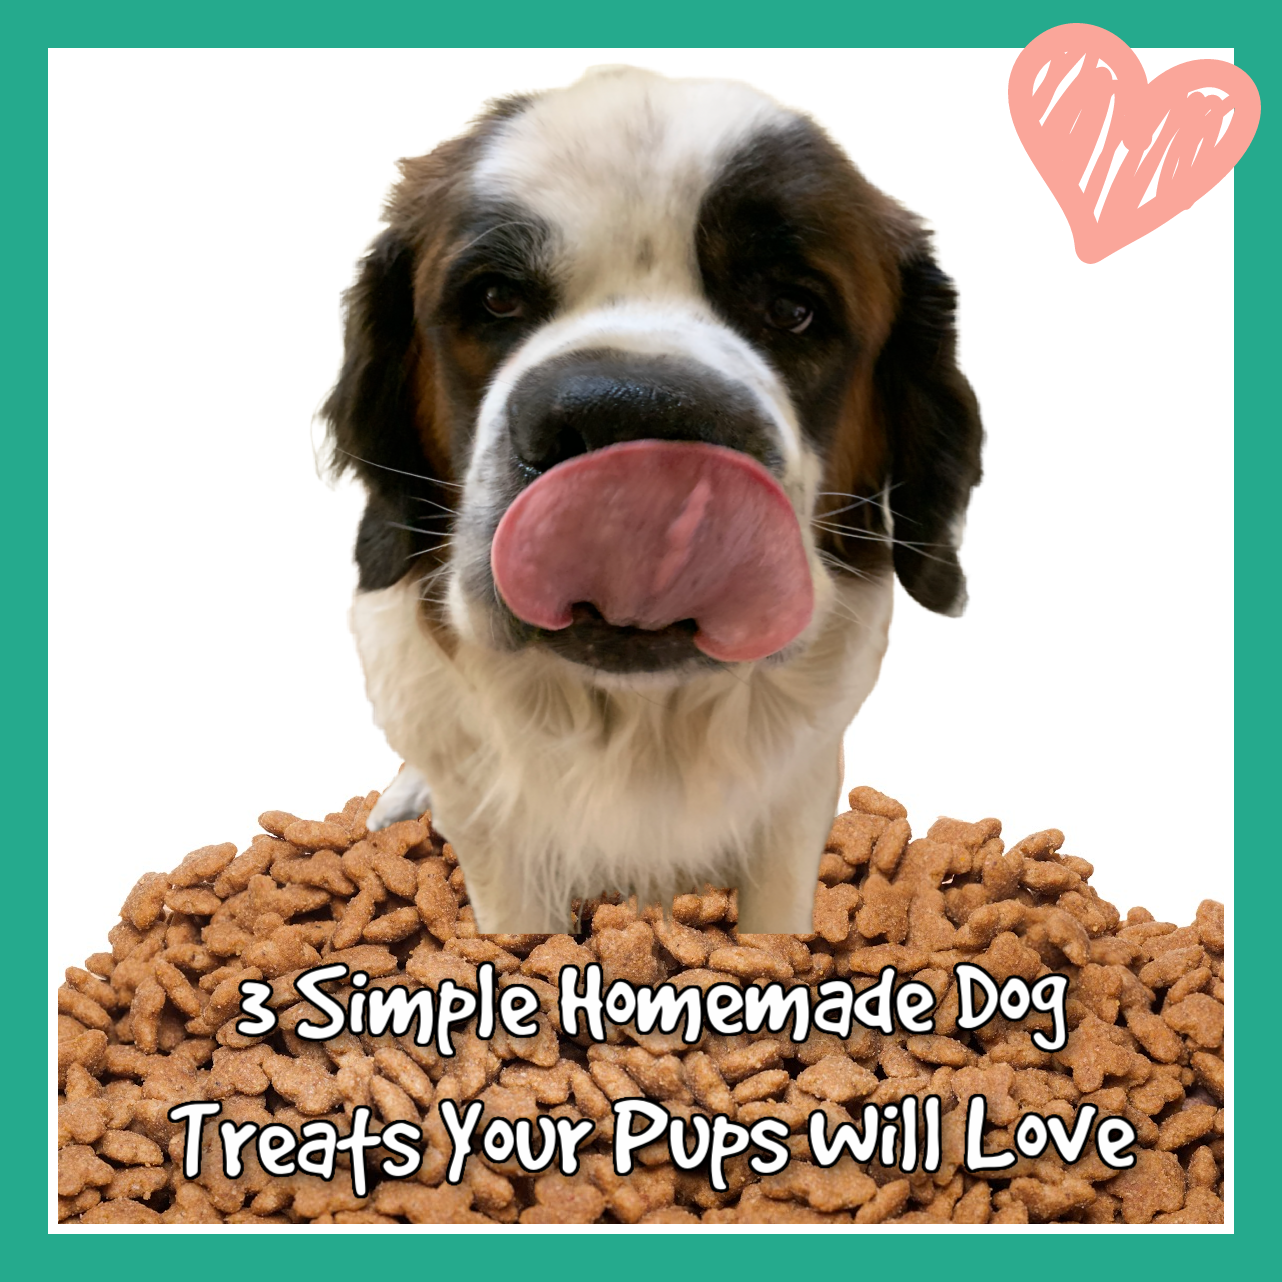 3 Simple Homemade Dog Treats Your Pups Will Love